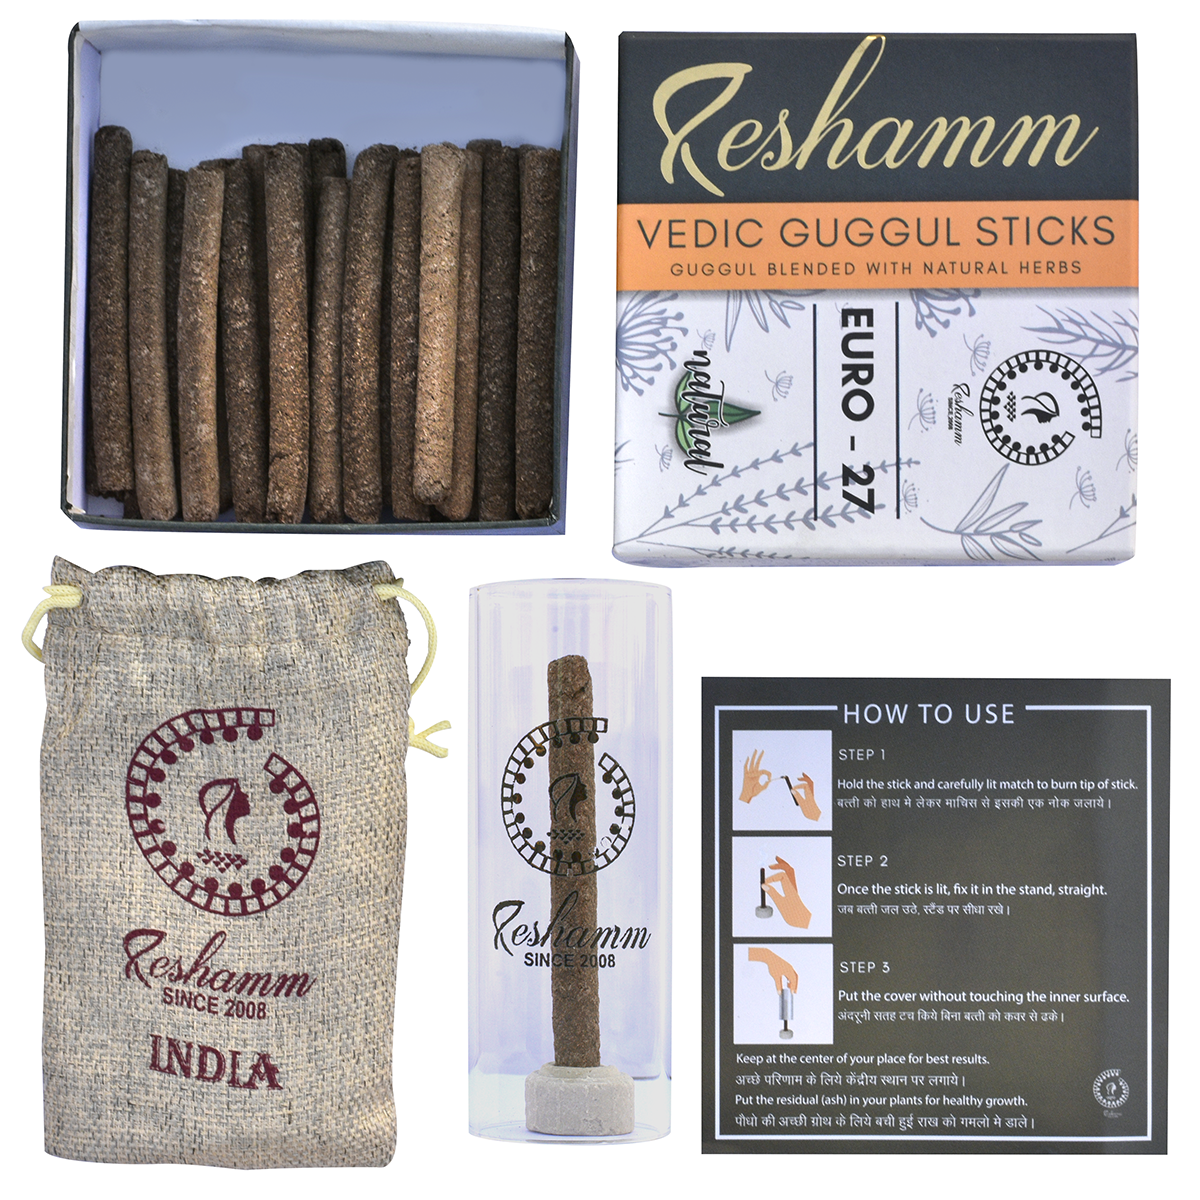 Vedic Guggul Sticks (Euro 27) made of Guggul & 26 Natural Herbs Powder. Festival gifts, Aroma Therapy, Positive vibes. Beautiful packaging. 30 sticks Pack.